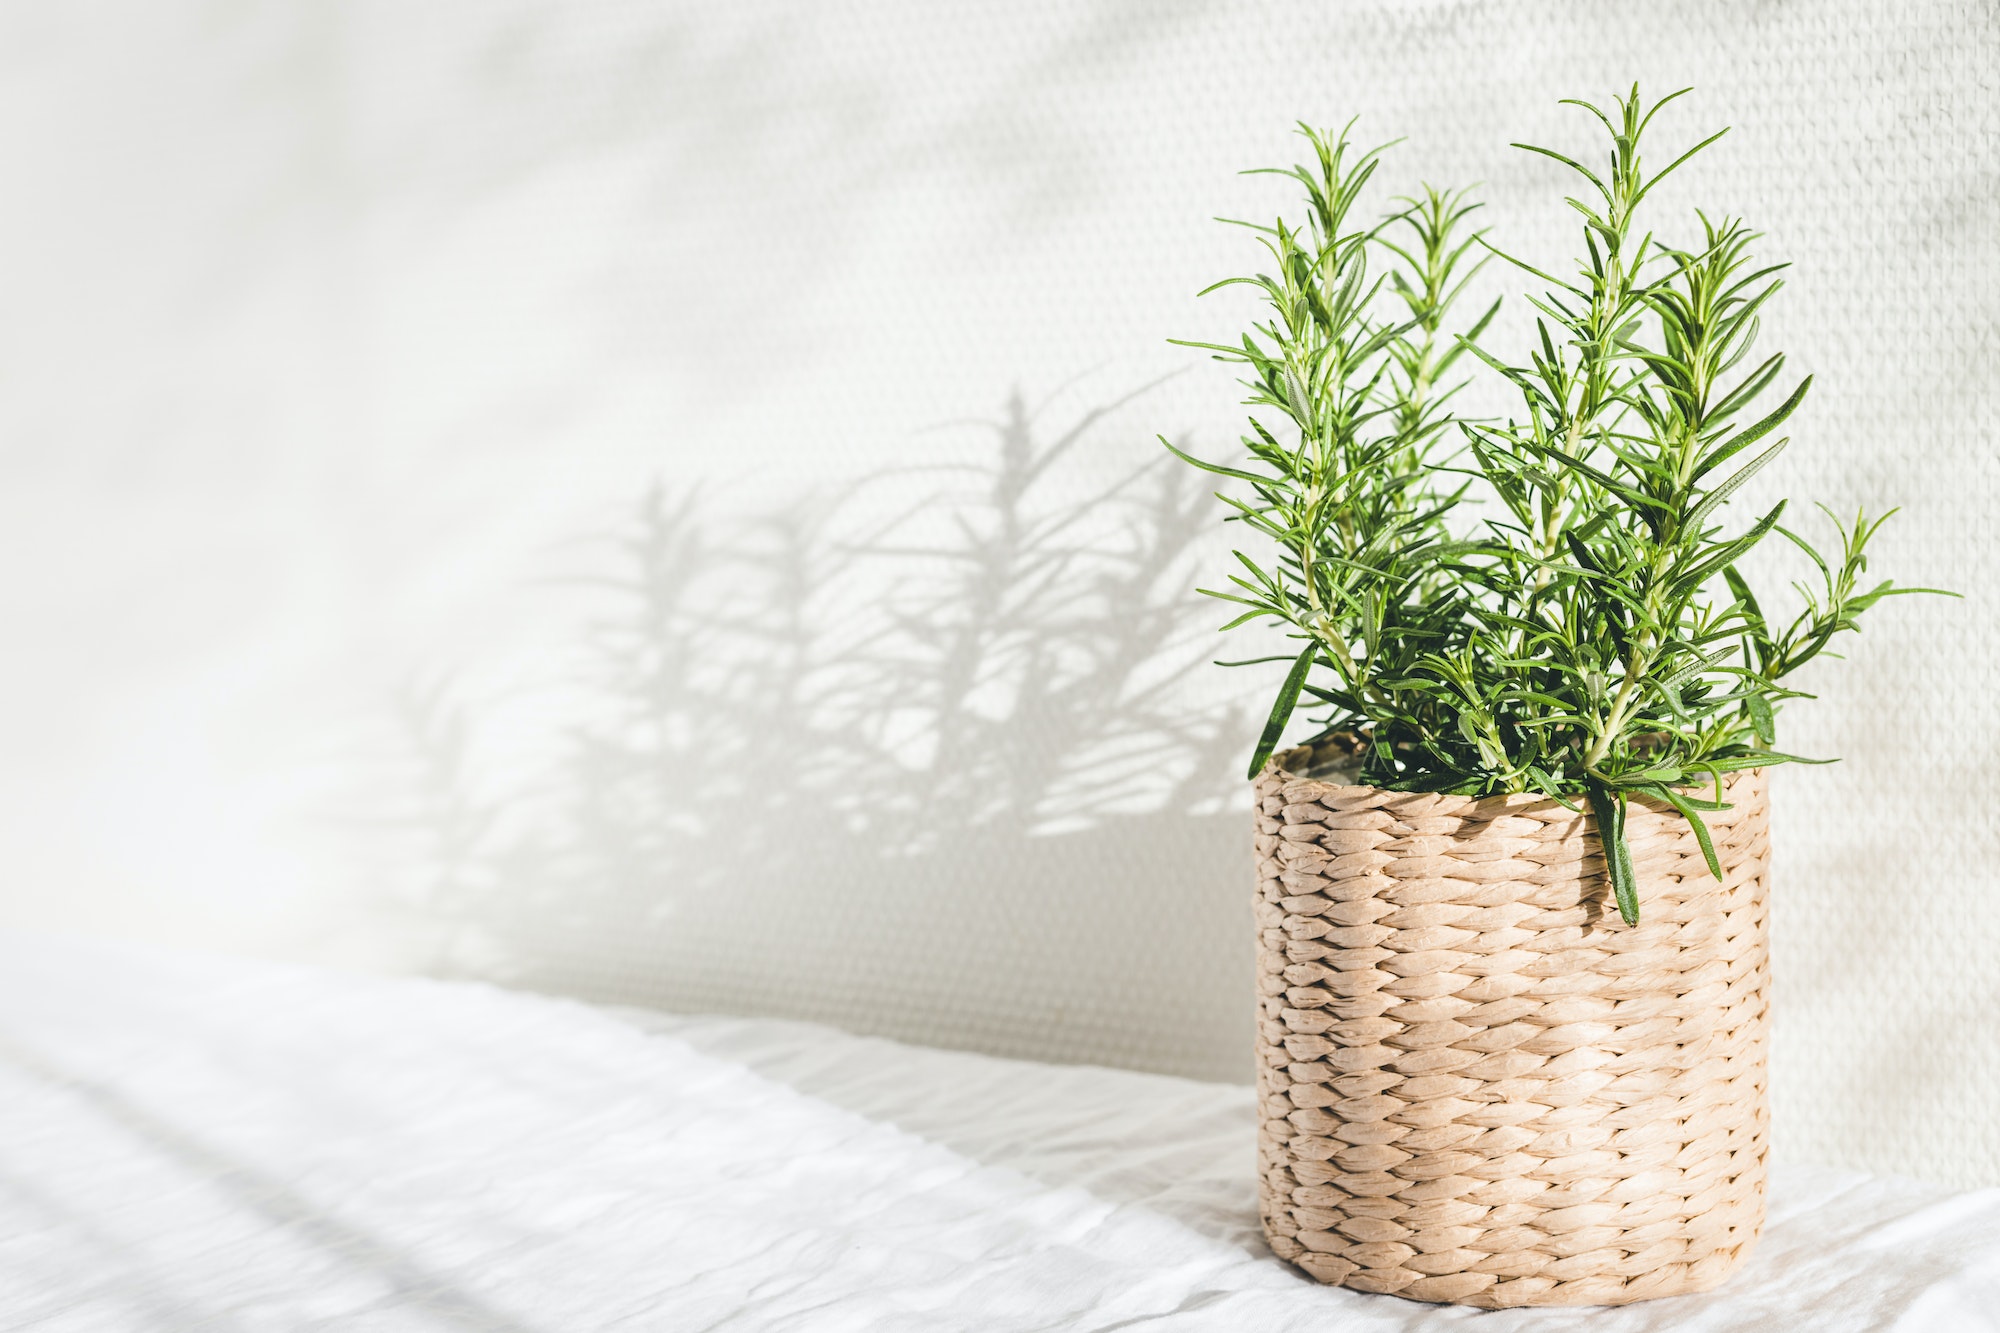 rosemary in a wicker pot - for article about how to make rosemary water for your hair